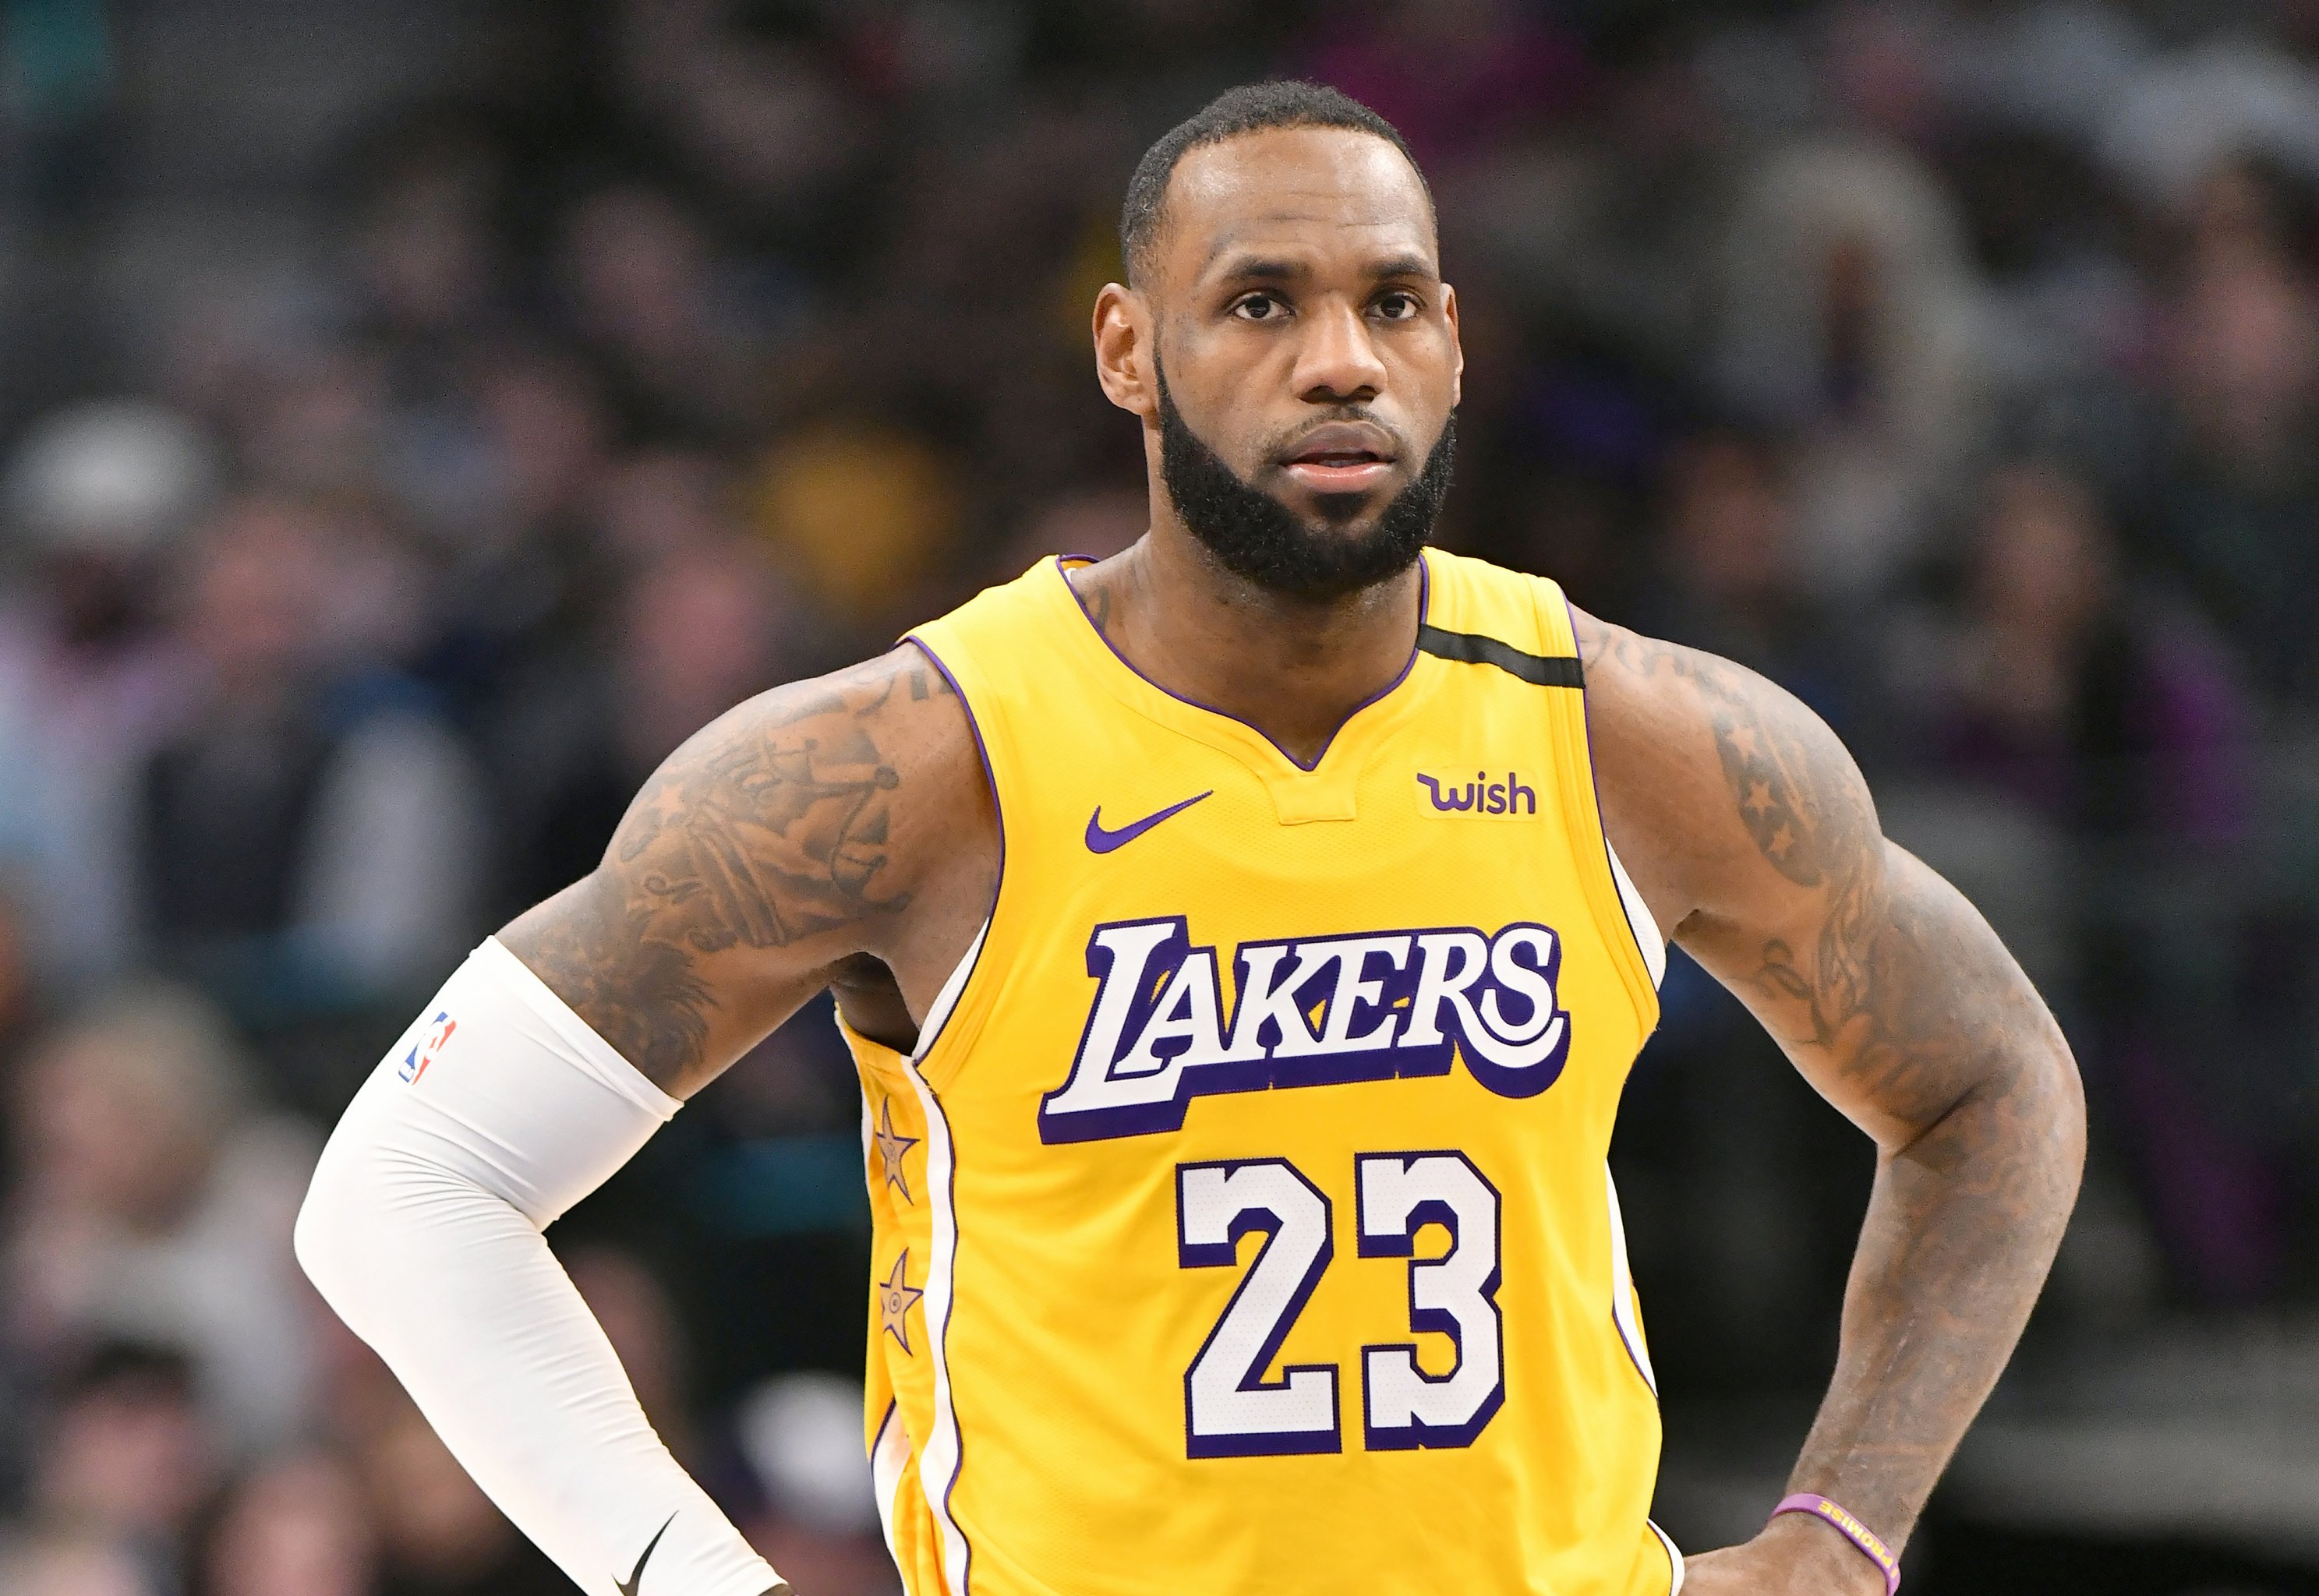 LeBron James posts 35 points, 16 boards, Lakers beat Mavs